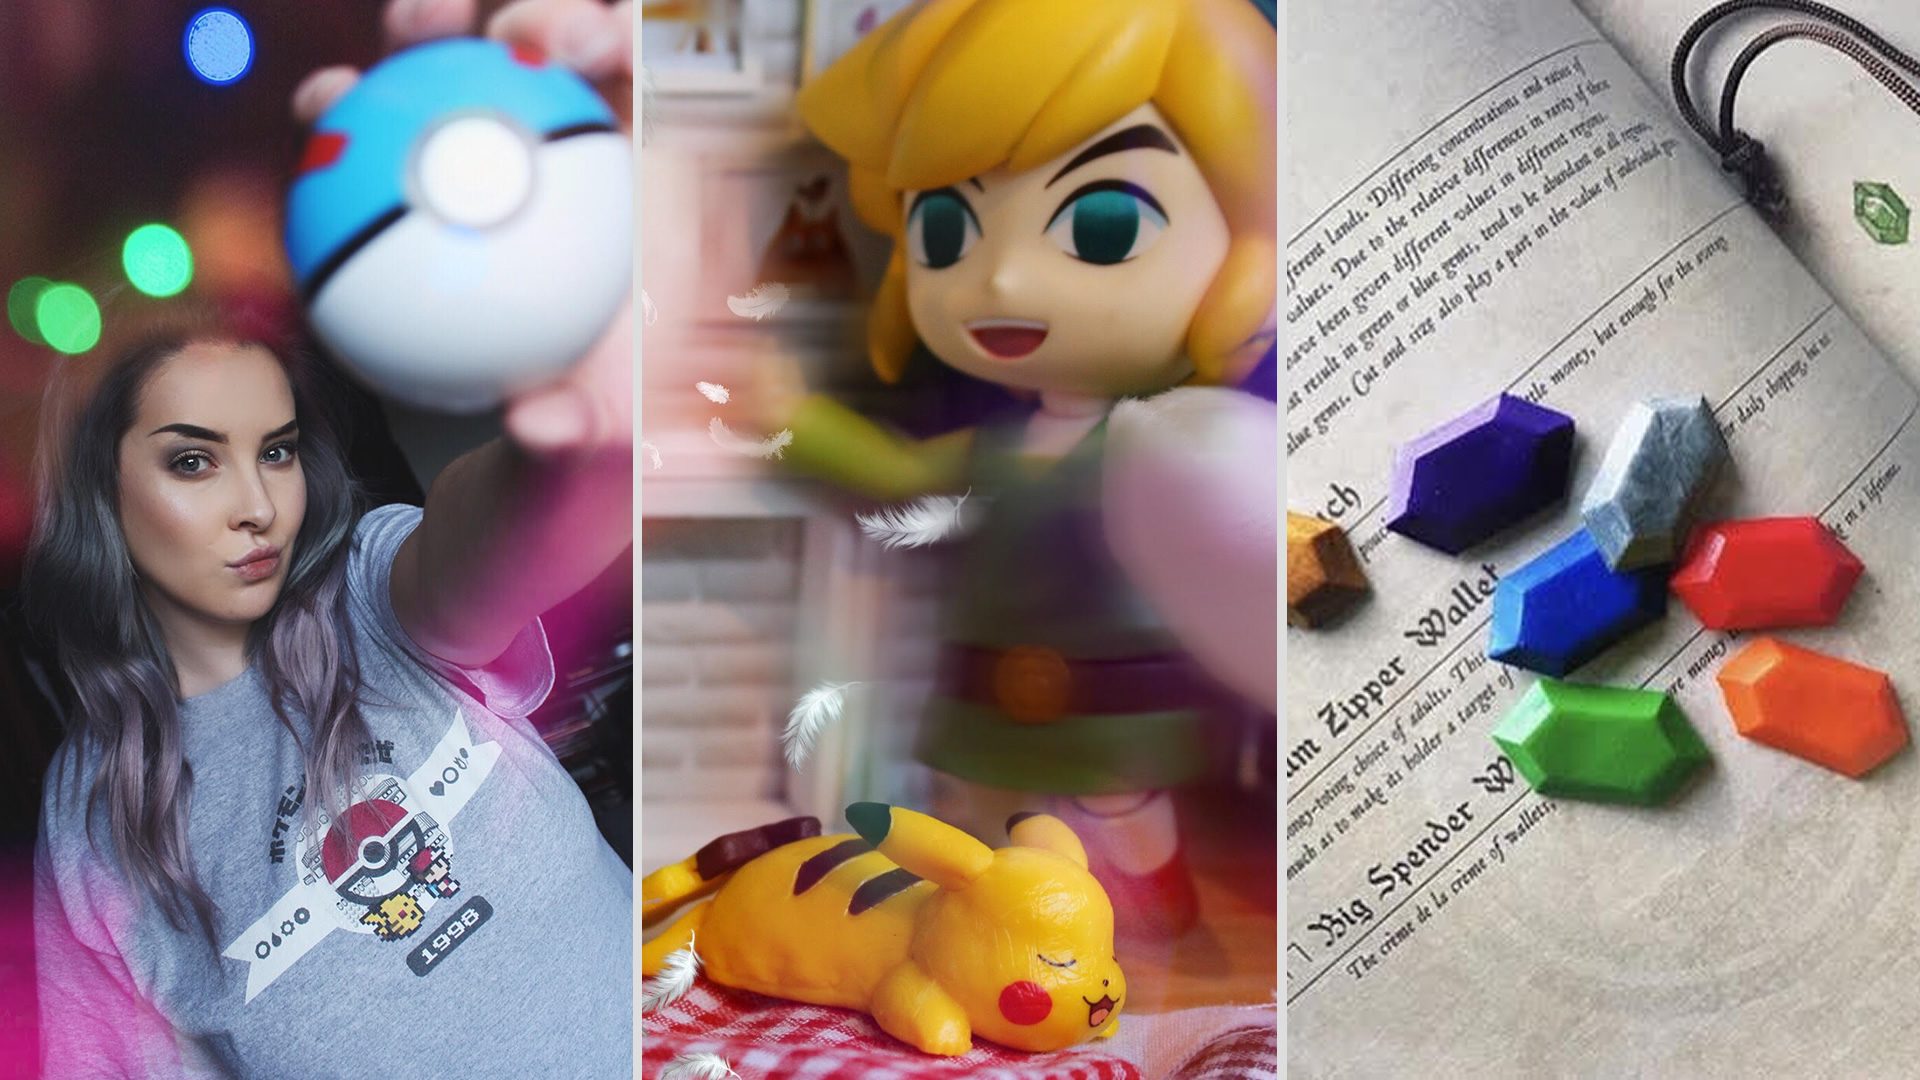 Interview: Pixellacreations on a love for Zelda, Nintendo and Miniatures